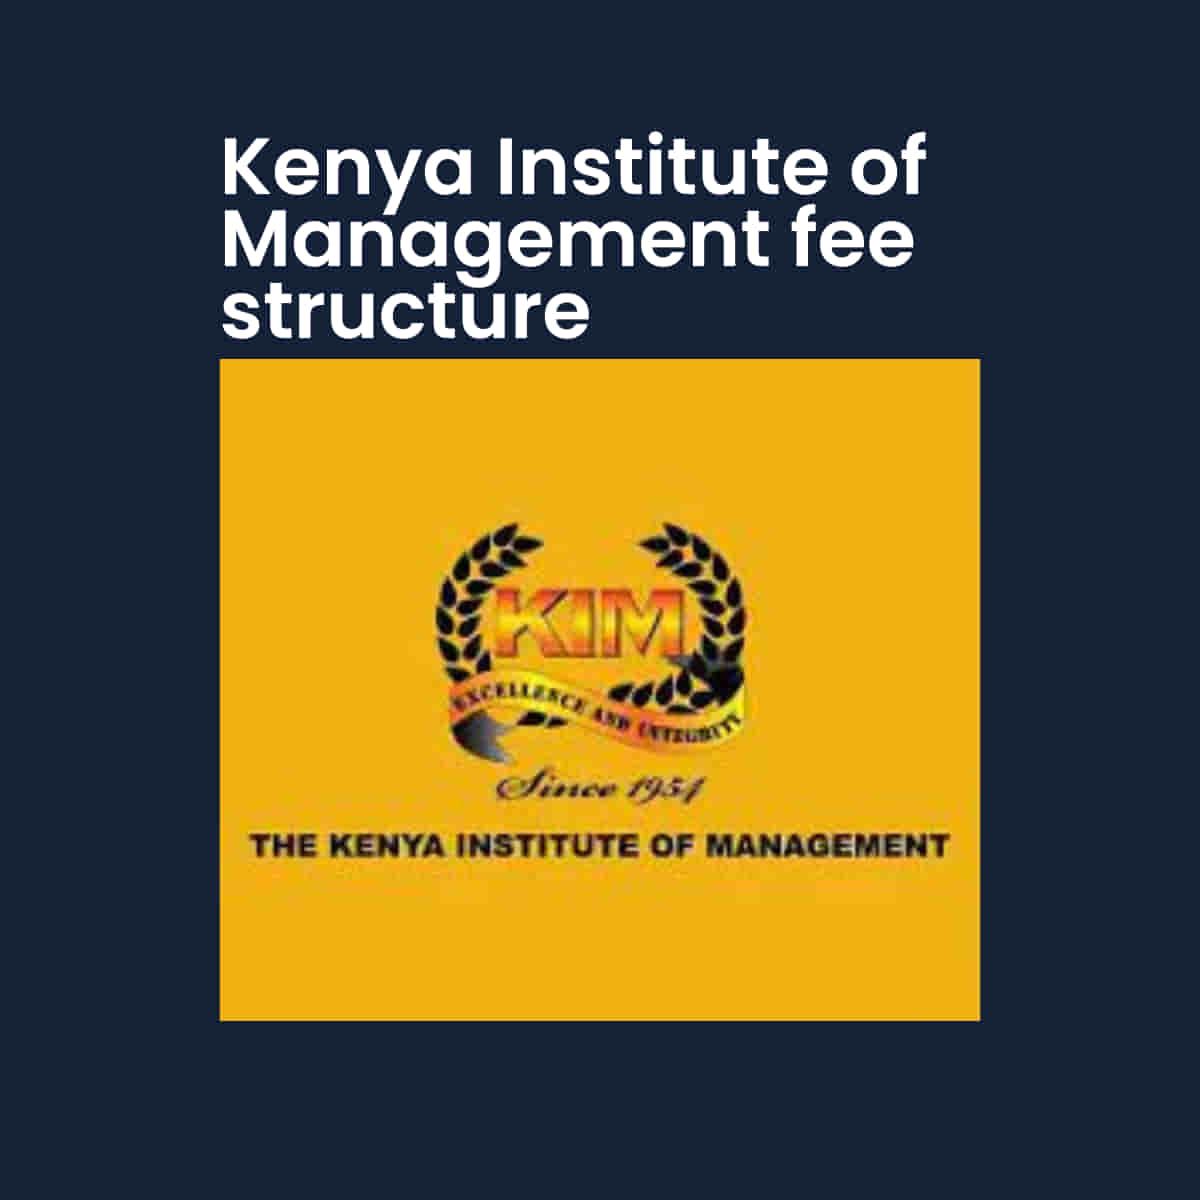 Kenya Institute of Management fee structure